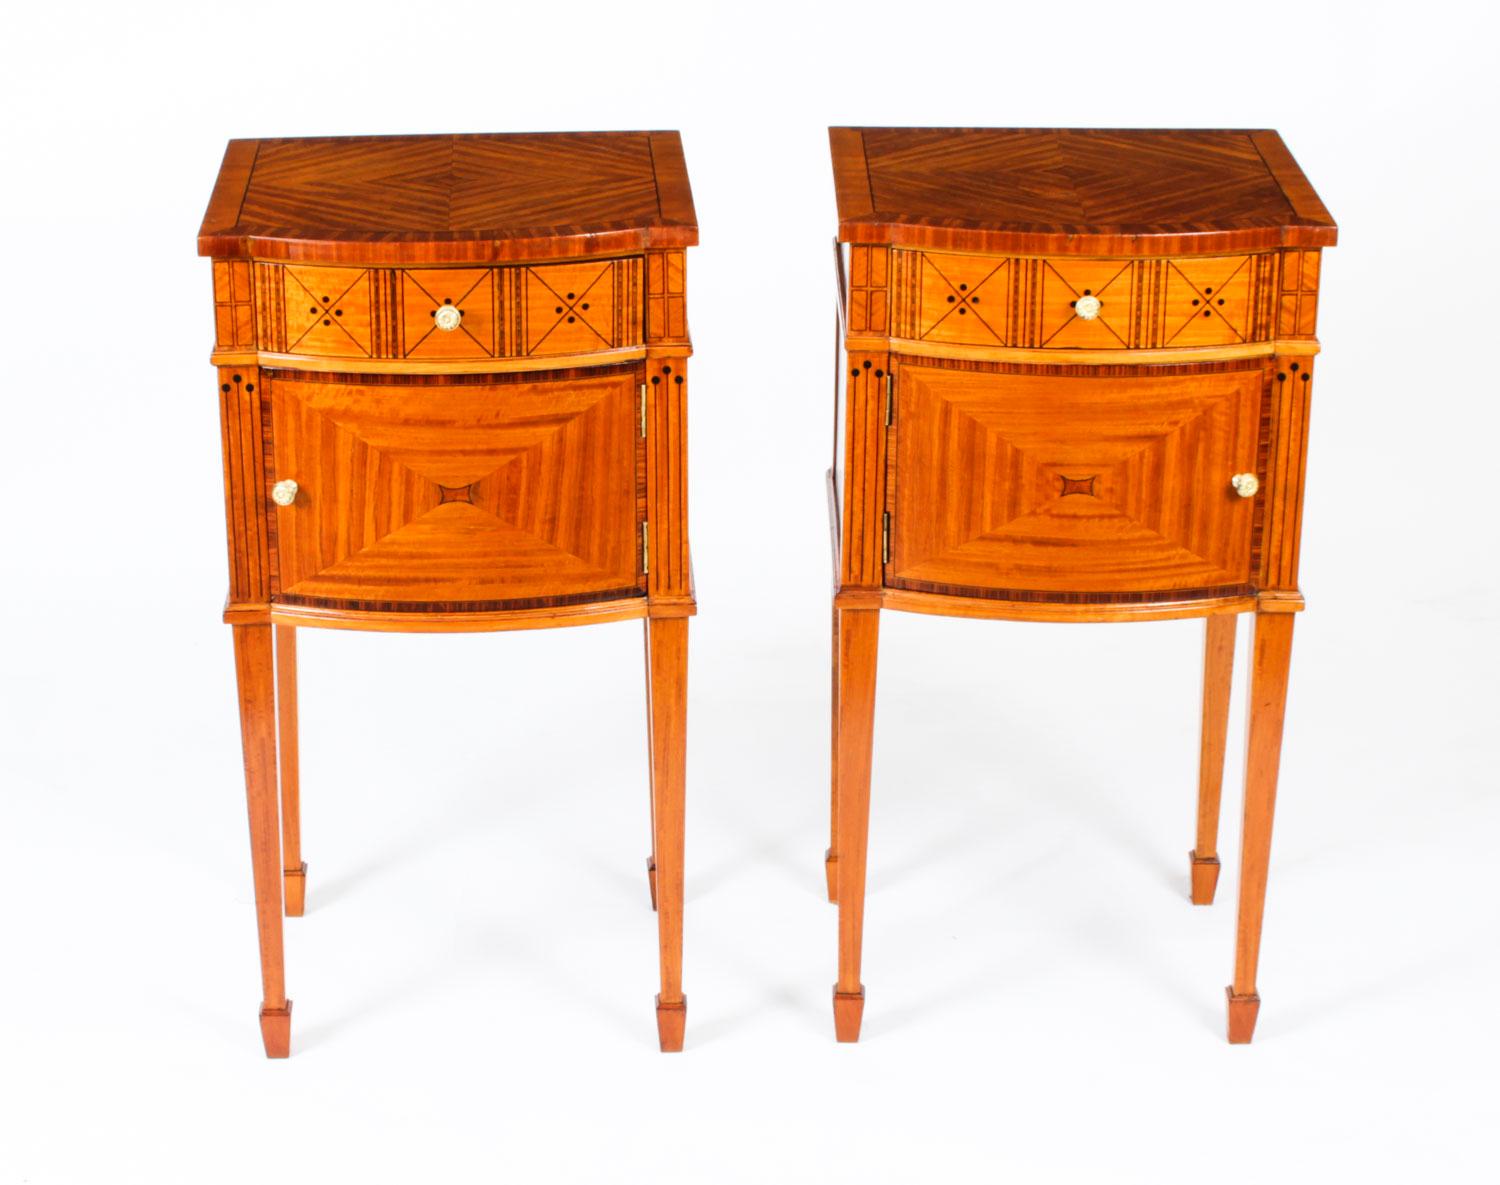 This is a stunning pair of antique French satinwood bow-front bedside cabinets, circa 1890 in date and bearing the embossed metal label of the renowned manufacturer Maple & Co, of London & Paris, this pair made for the Paris showrooms.

They are